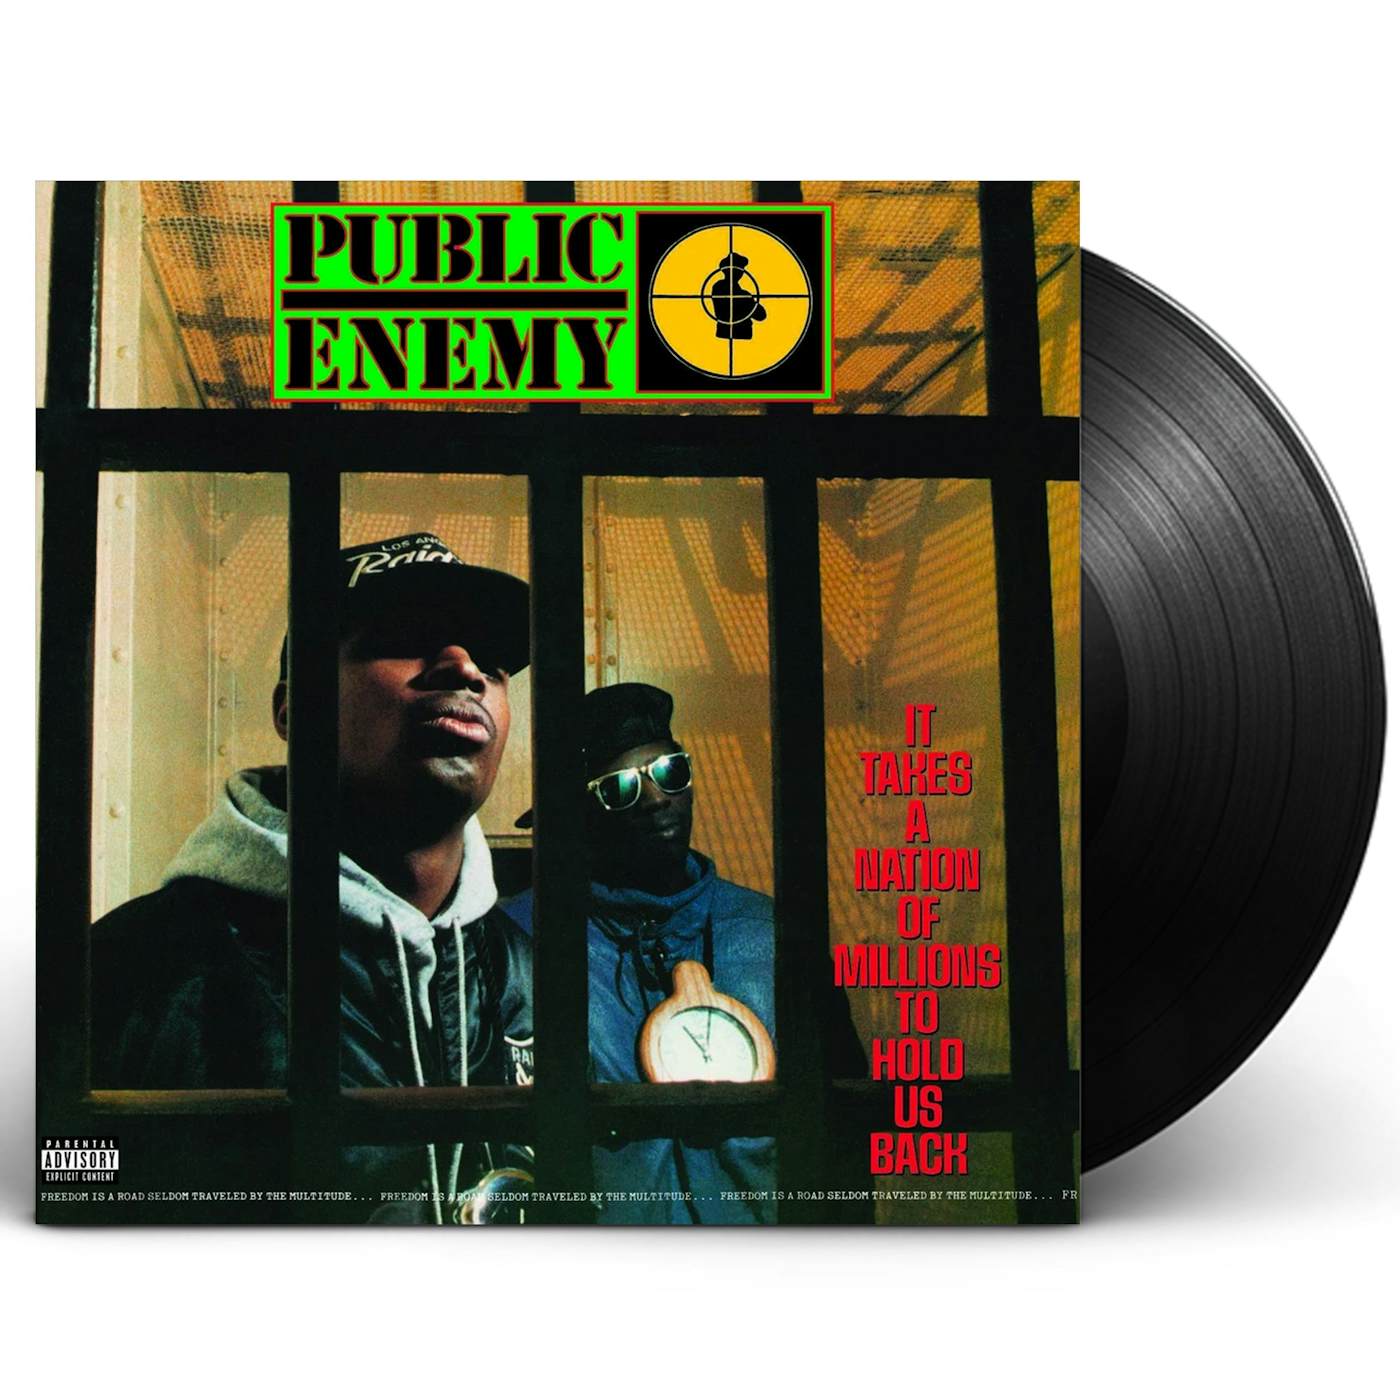 Public Enemy "It Takes A Nation Of Millions To Hold Us Back" 35th Anniversary 2xLP Vinyl